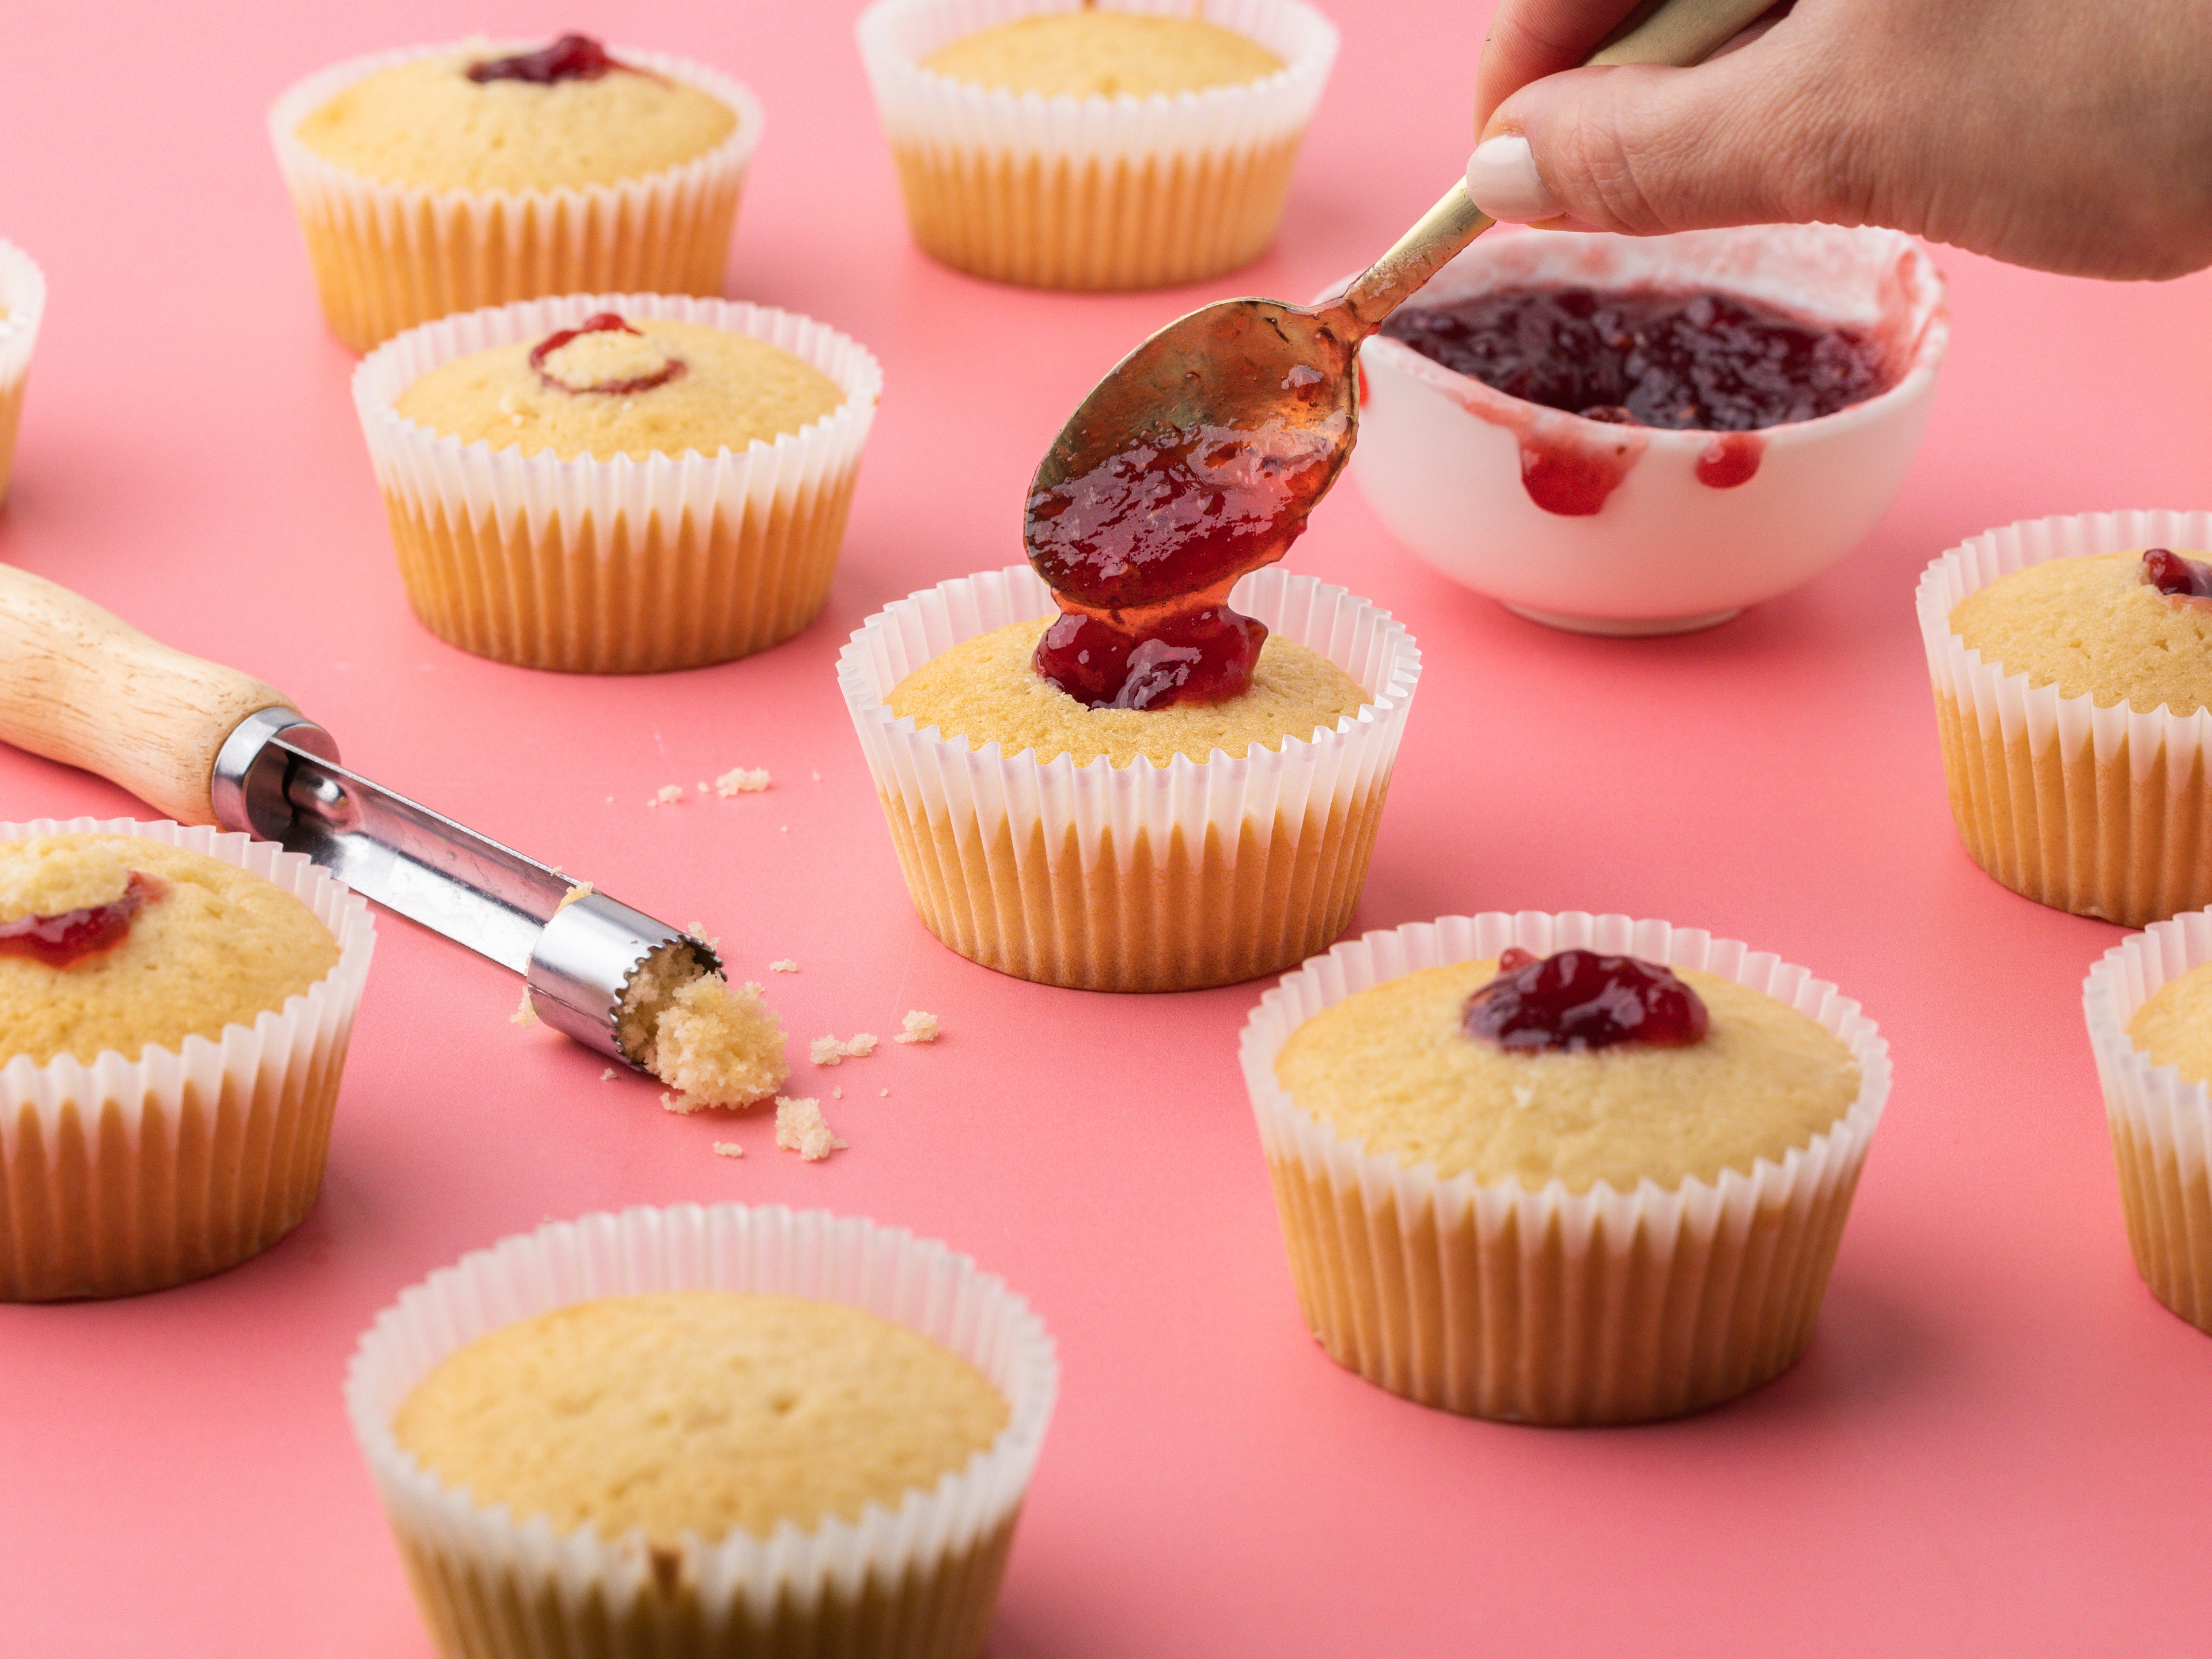 Hand spooning jam into the centre of a cupcake